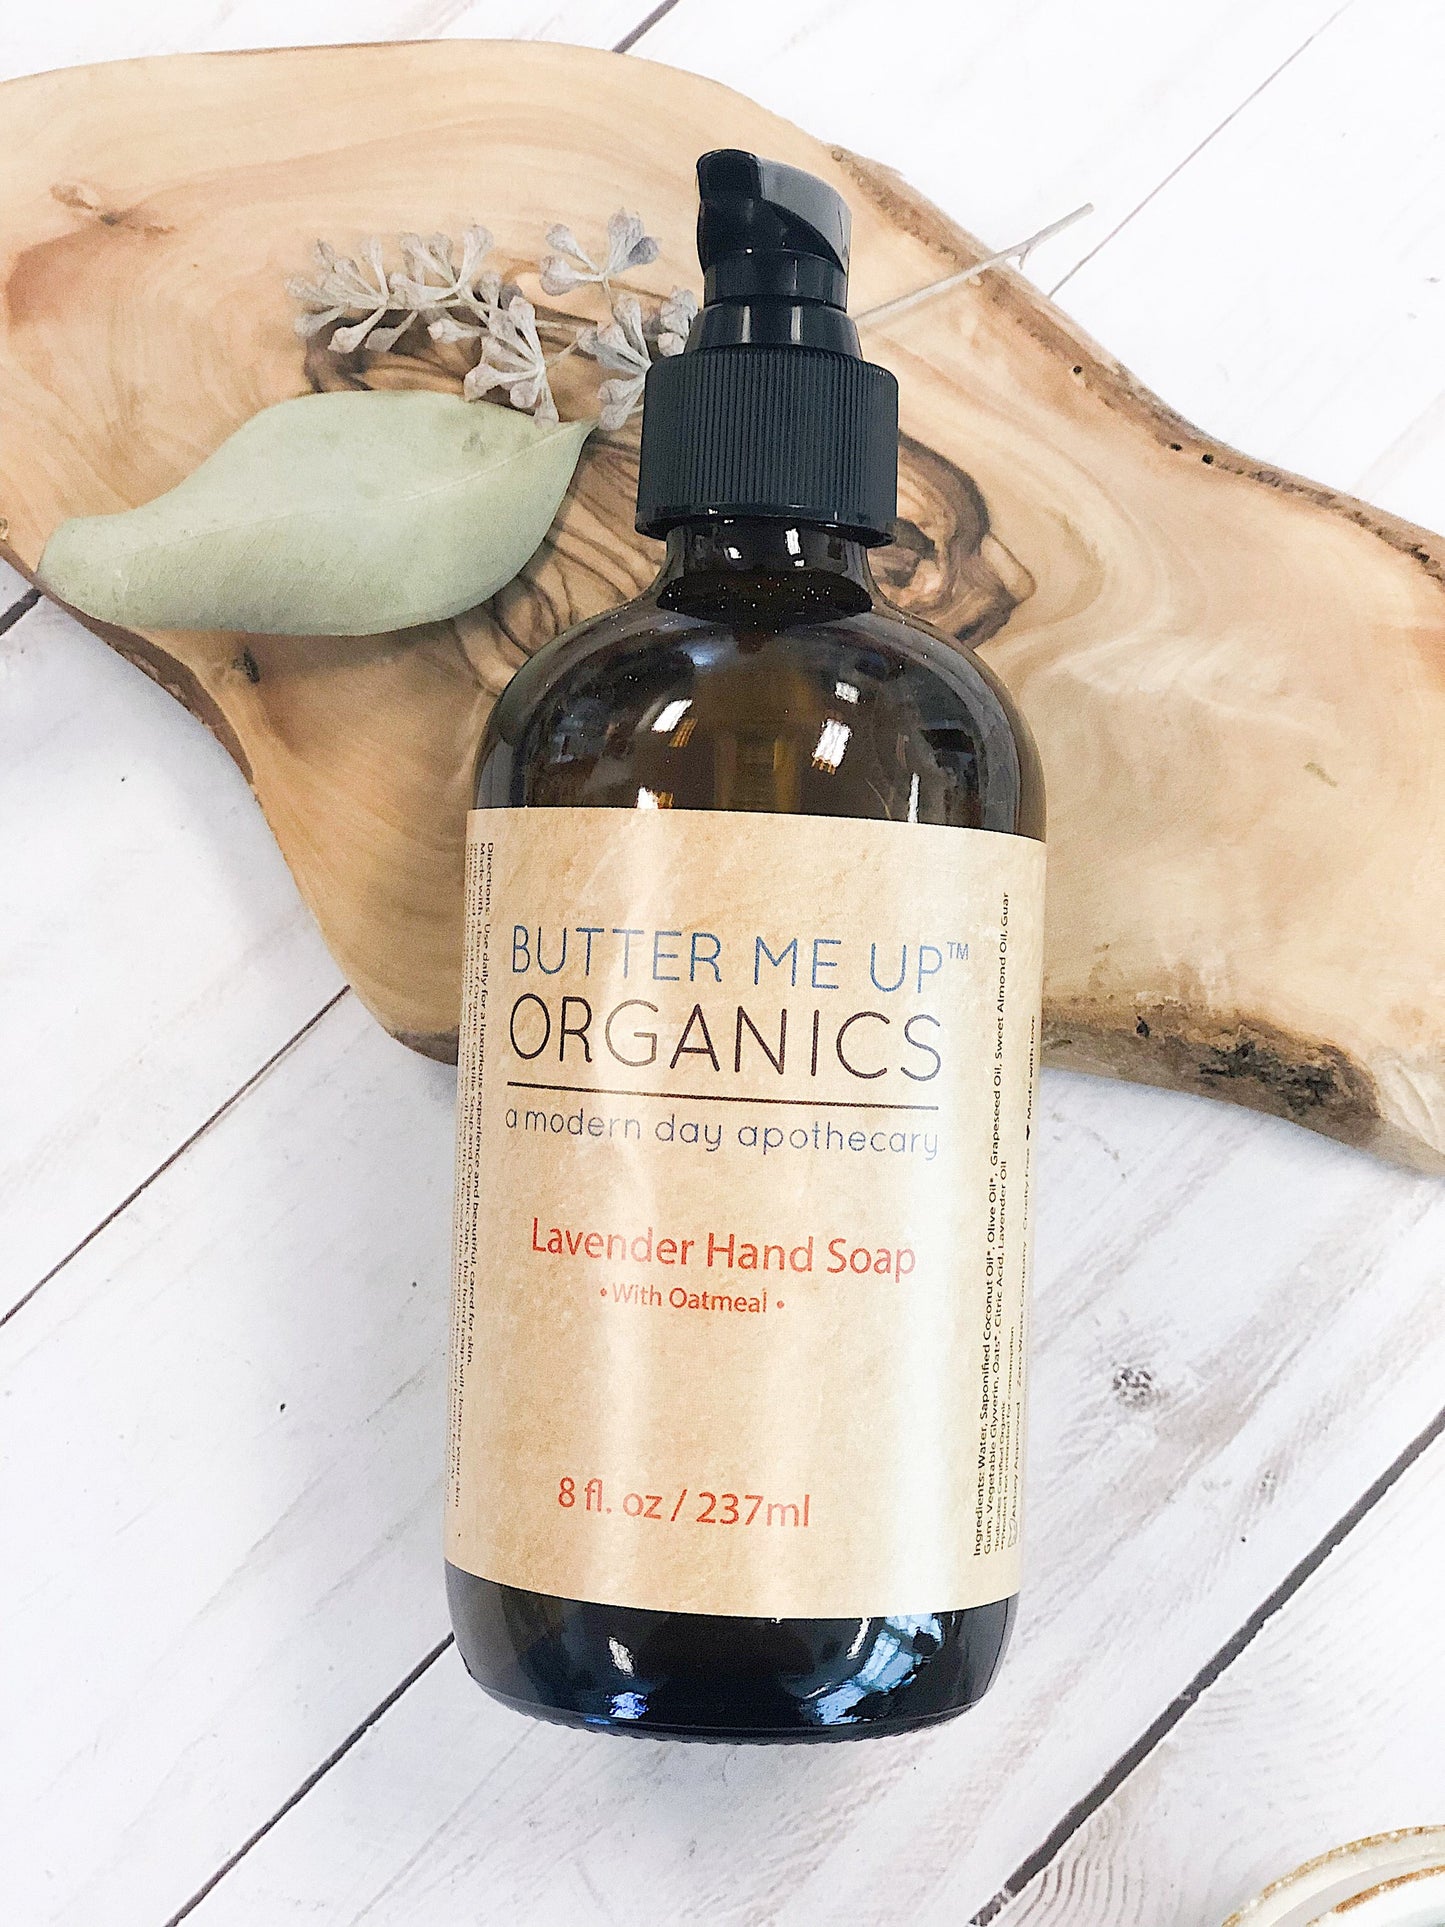 White Smokey - Organic Oatmeal Hand Soap enriched with organic oats and soothing lavender essential oil.